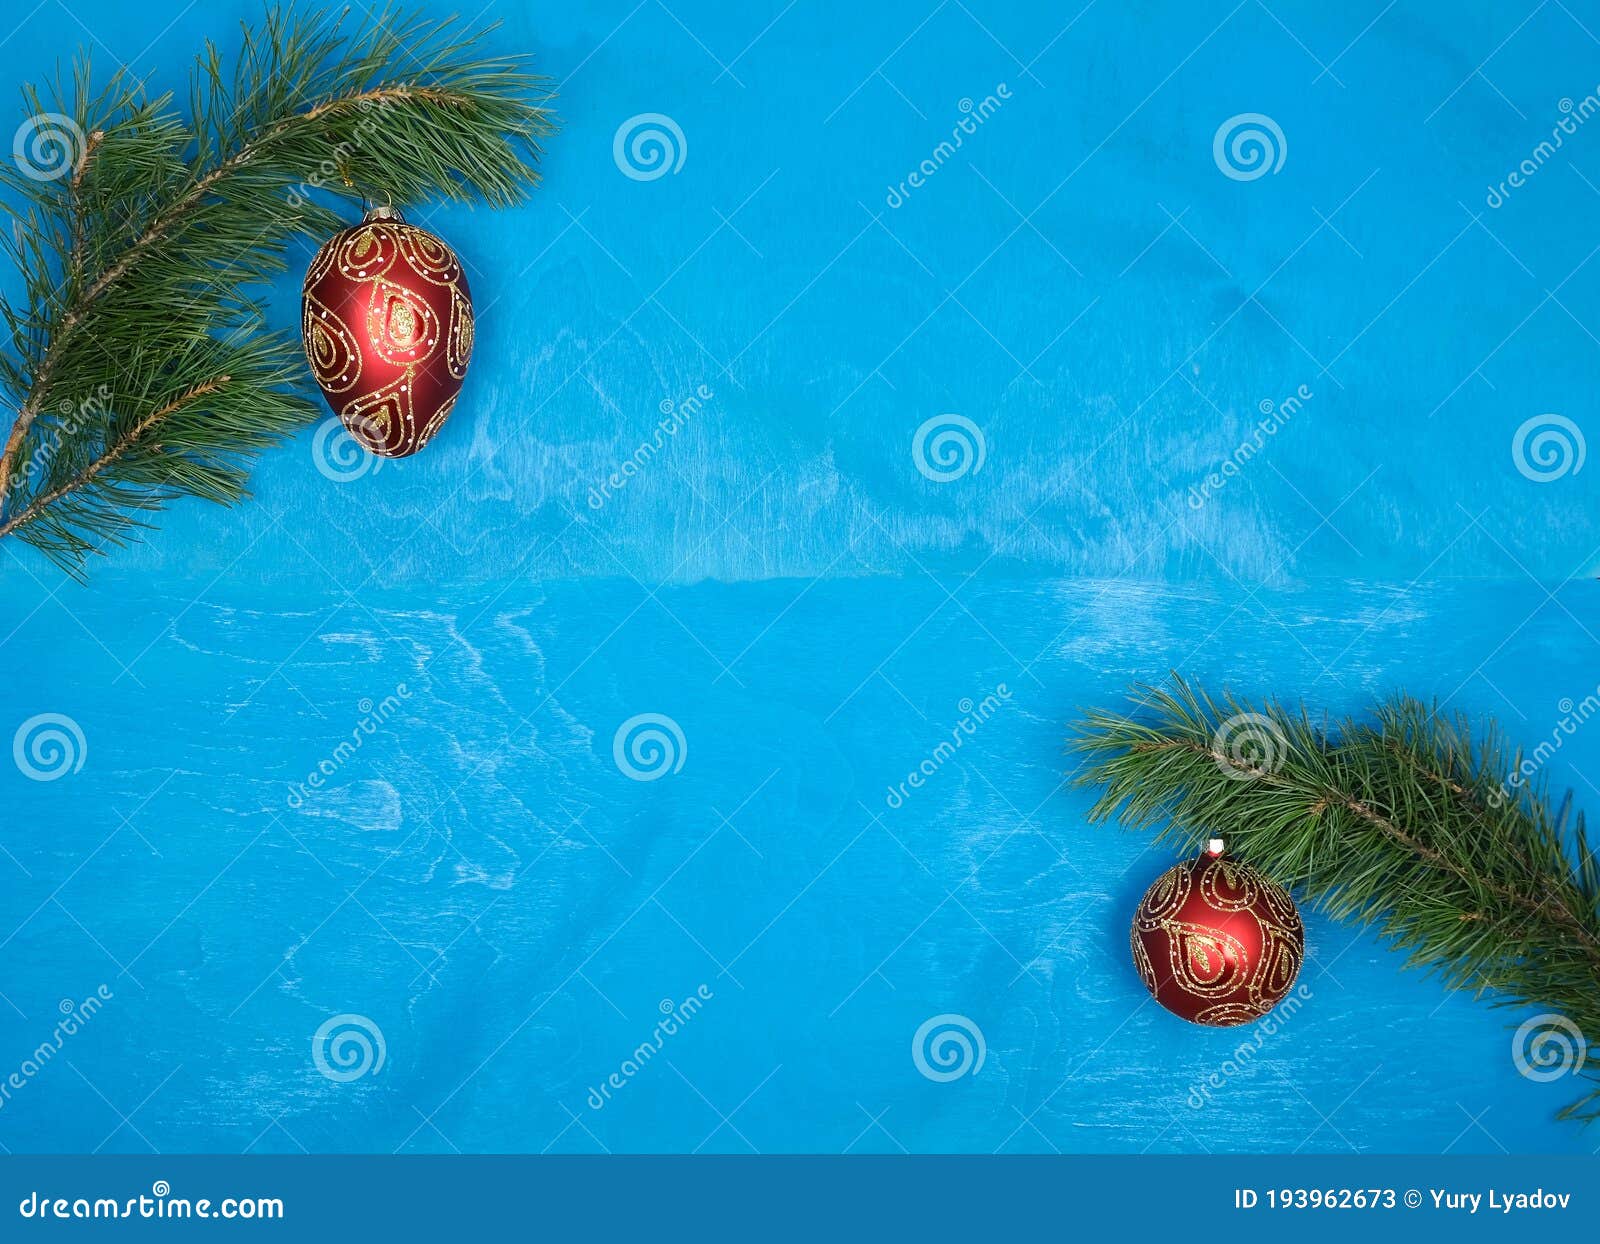 Pine Branches with New Year Decorations, Christmas Card, Space for ...